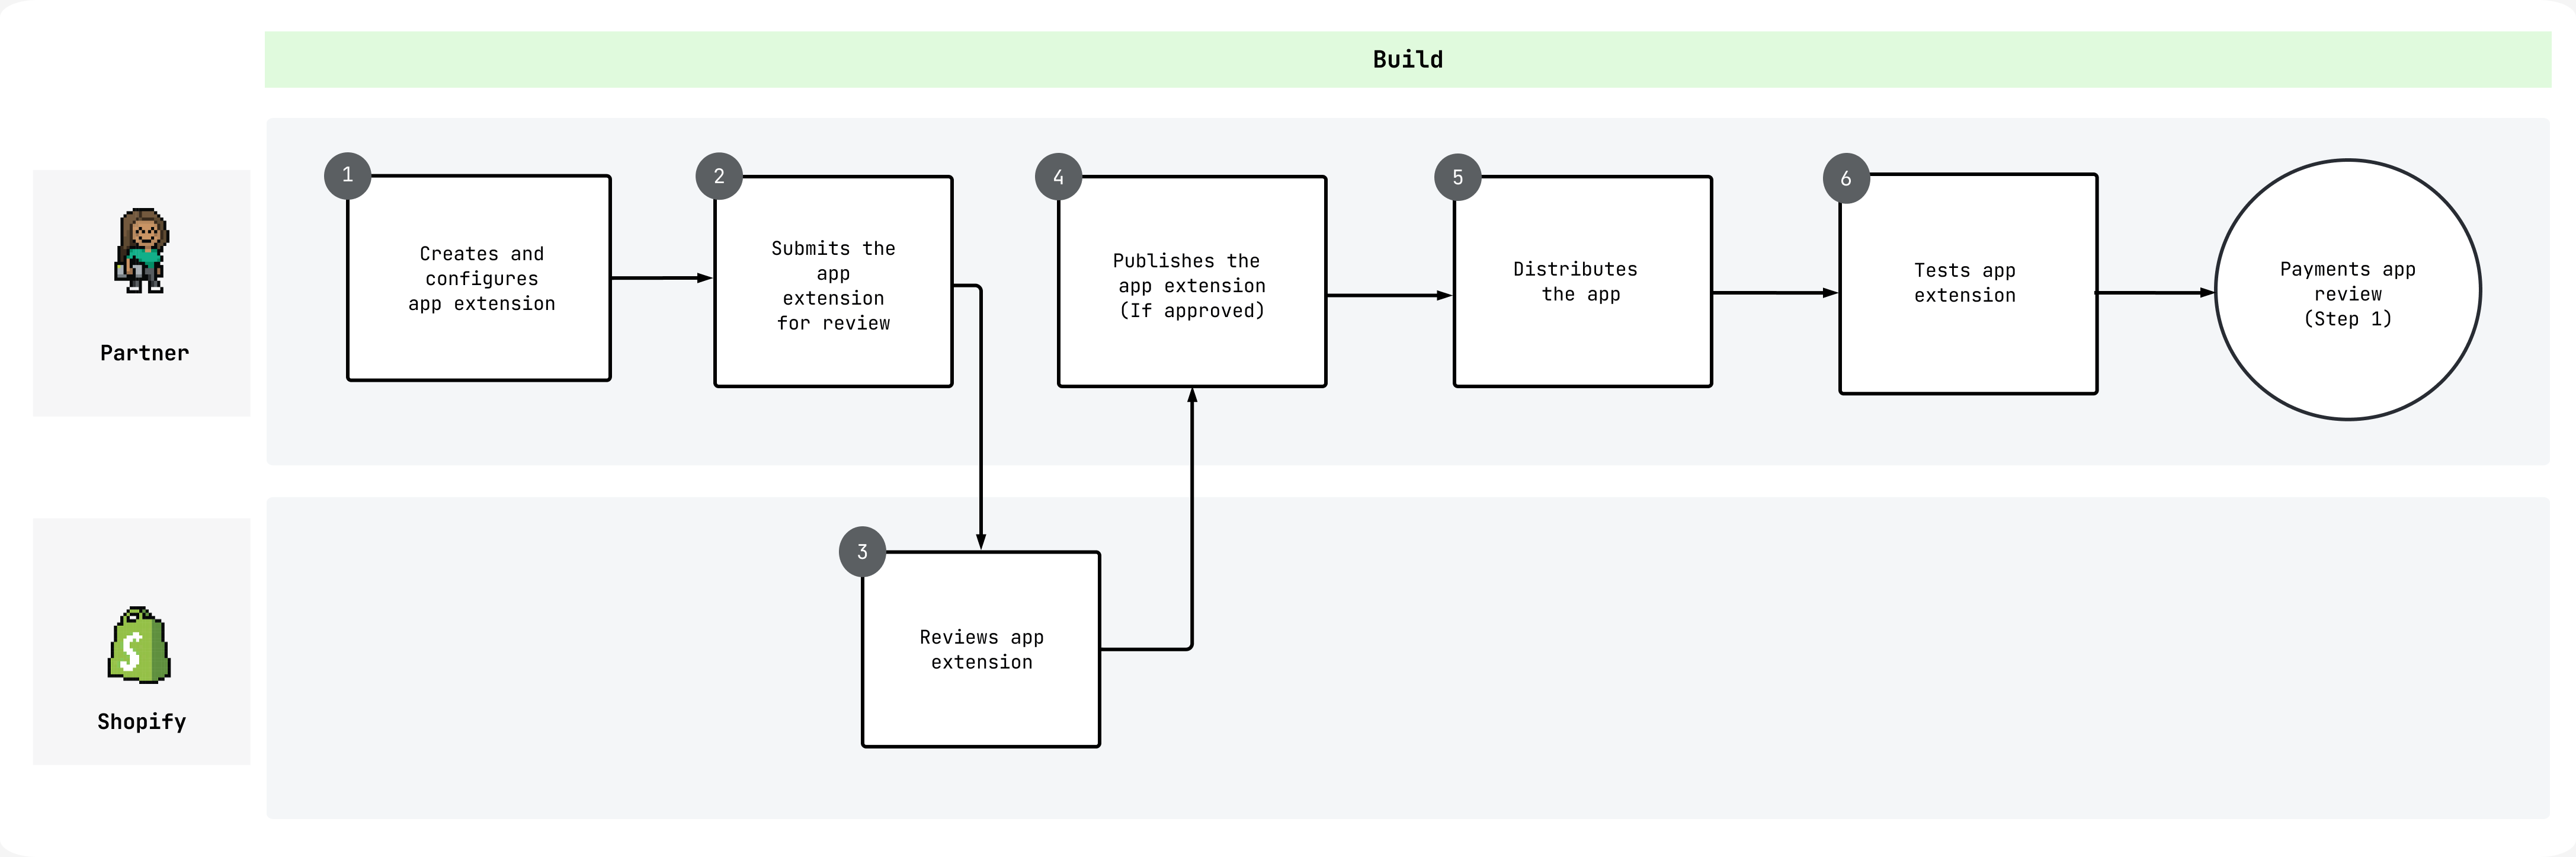 A flow chart of the payments app extension review process steps listed above